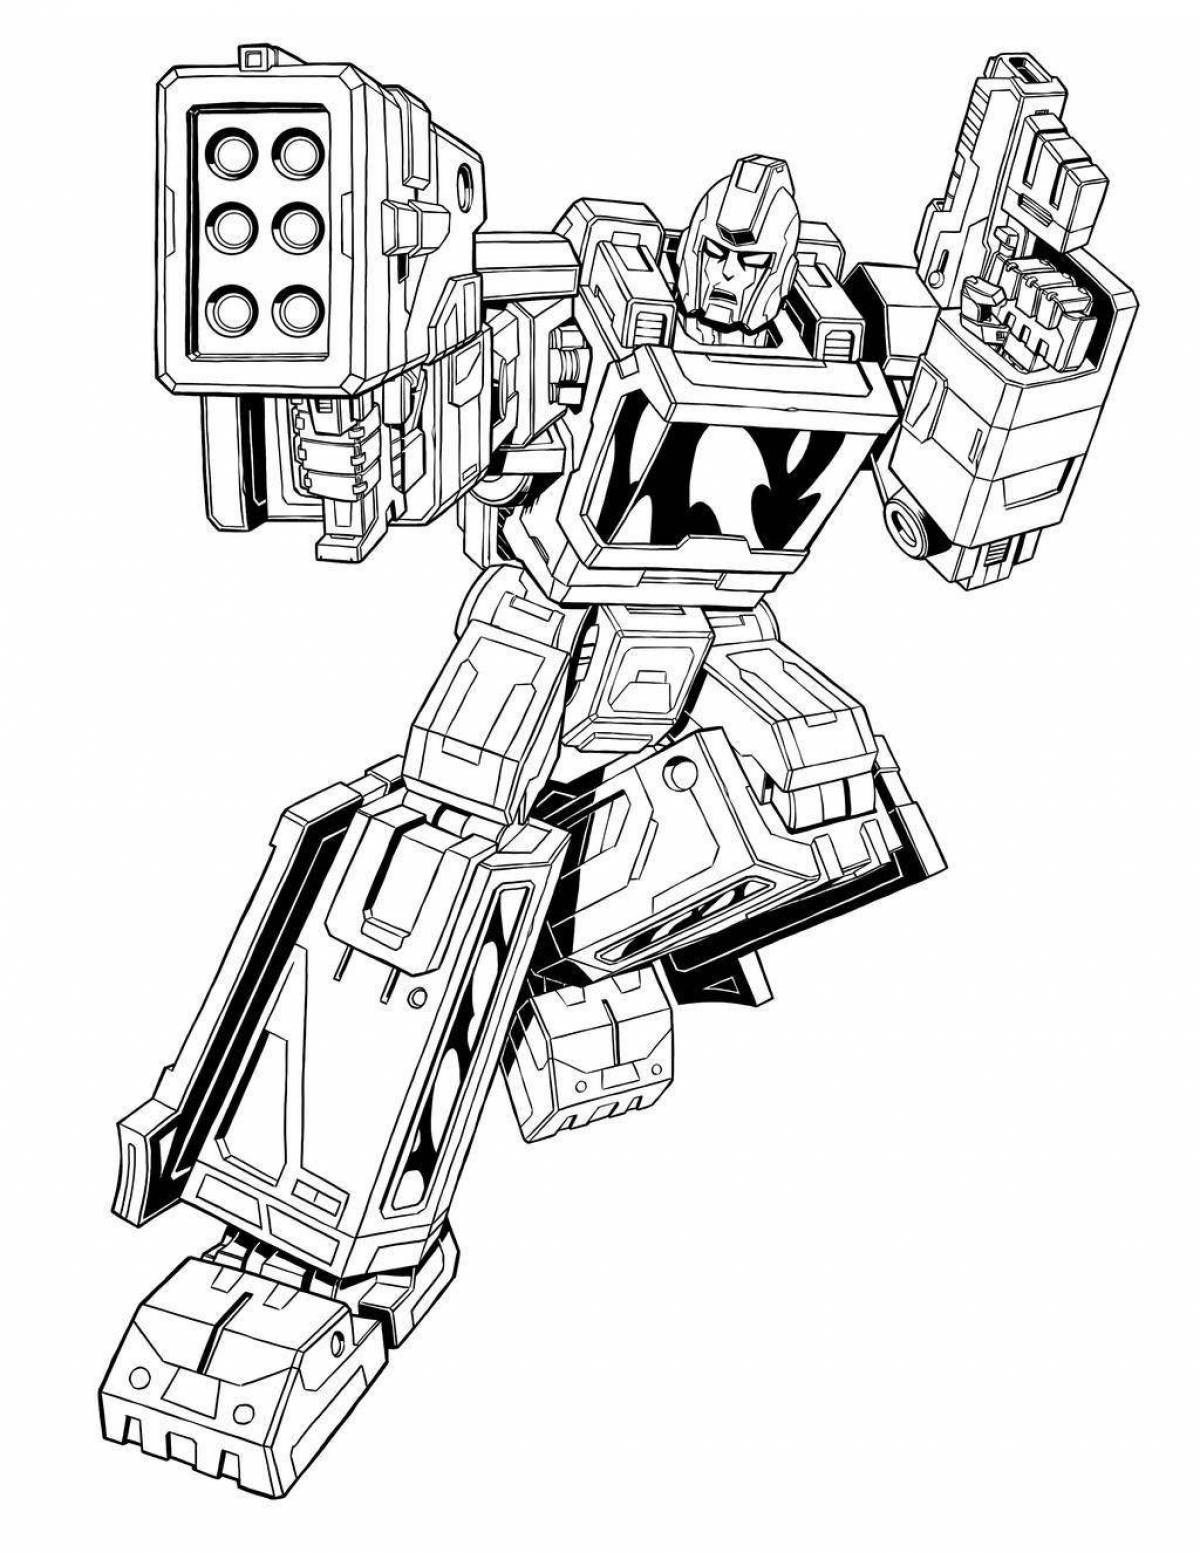 Coloring book gorgeous transformer ironhide